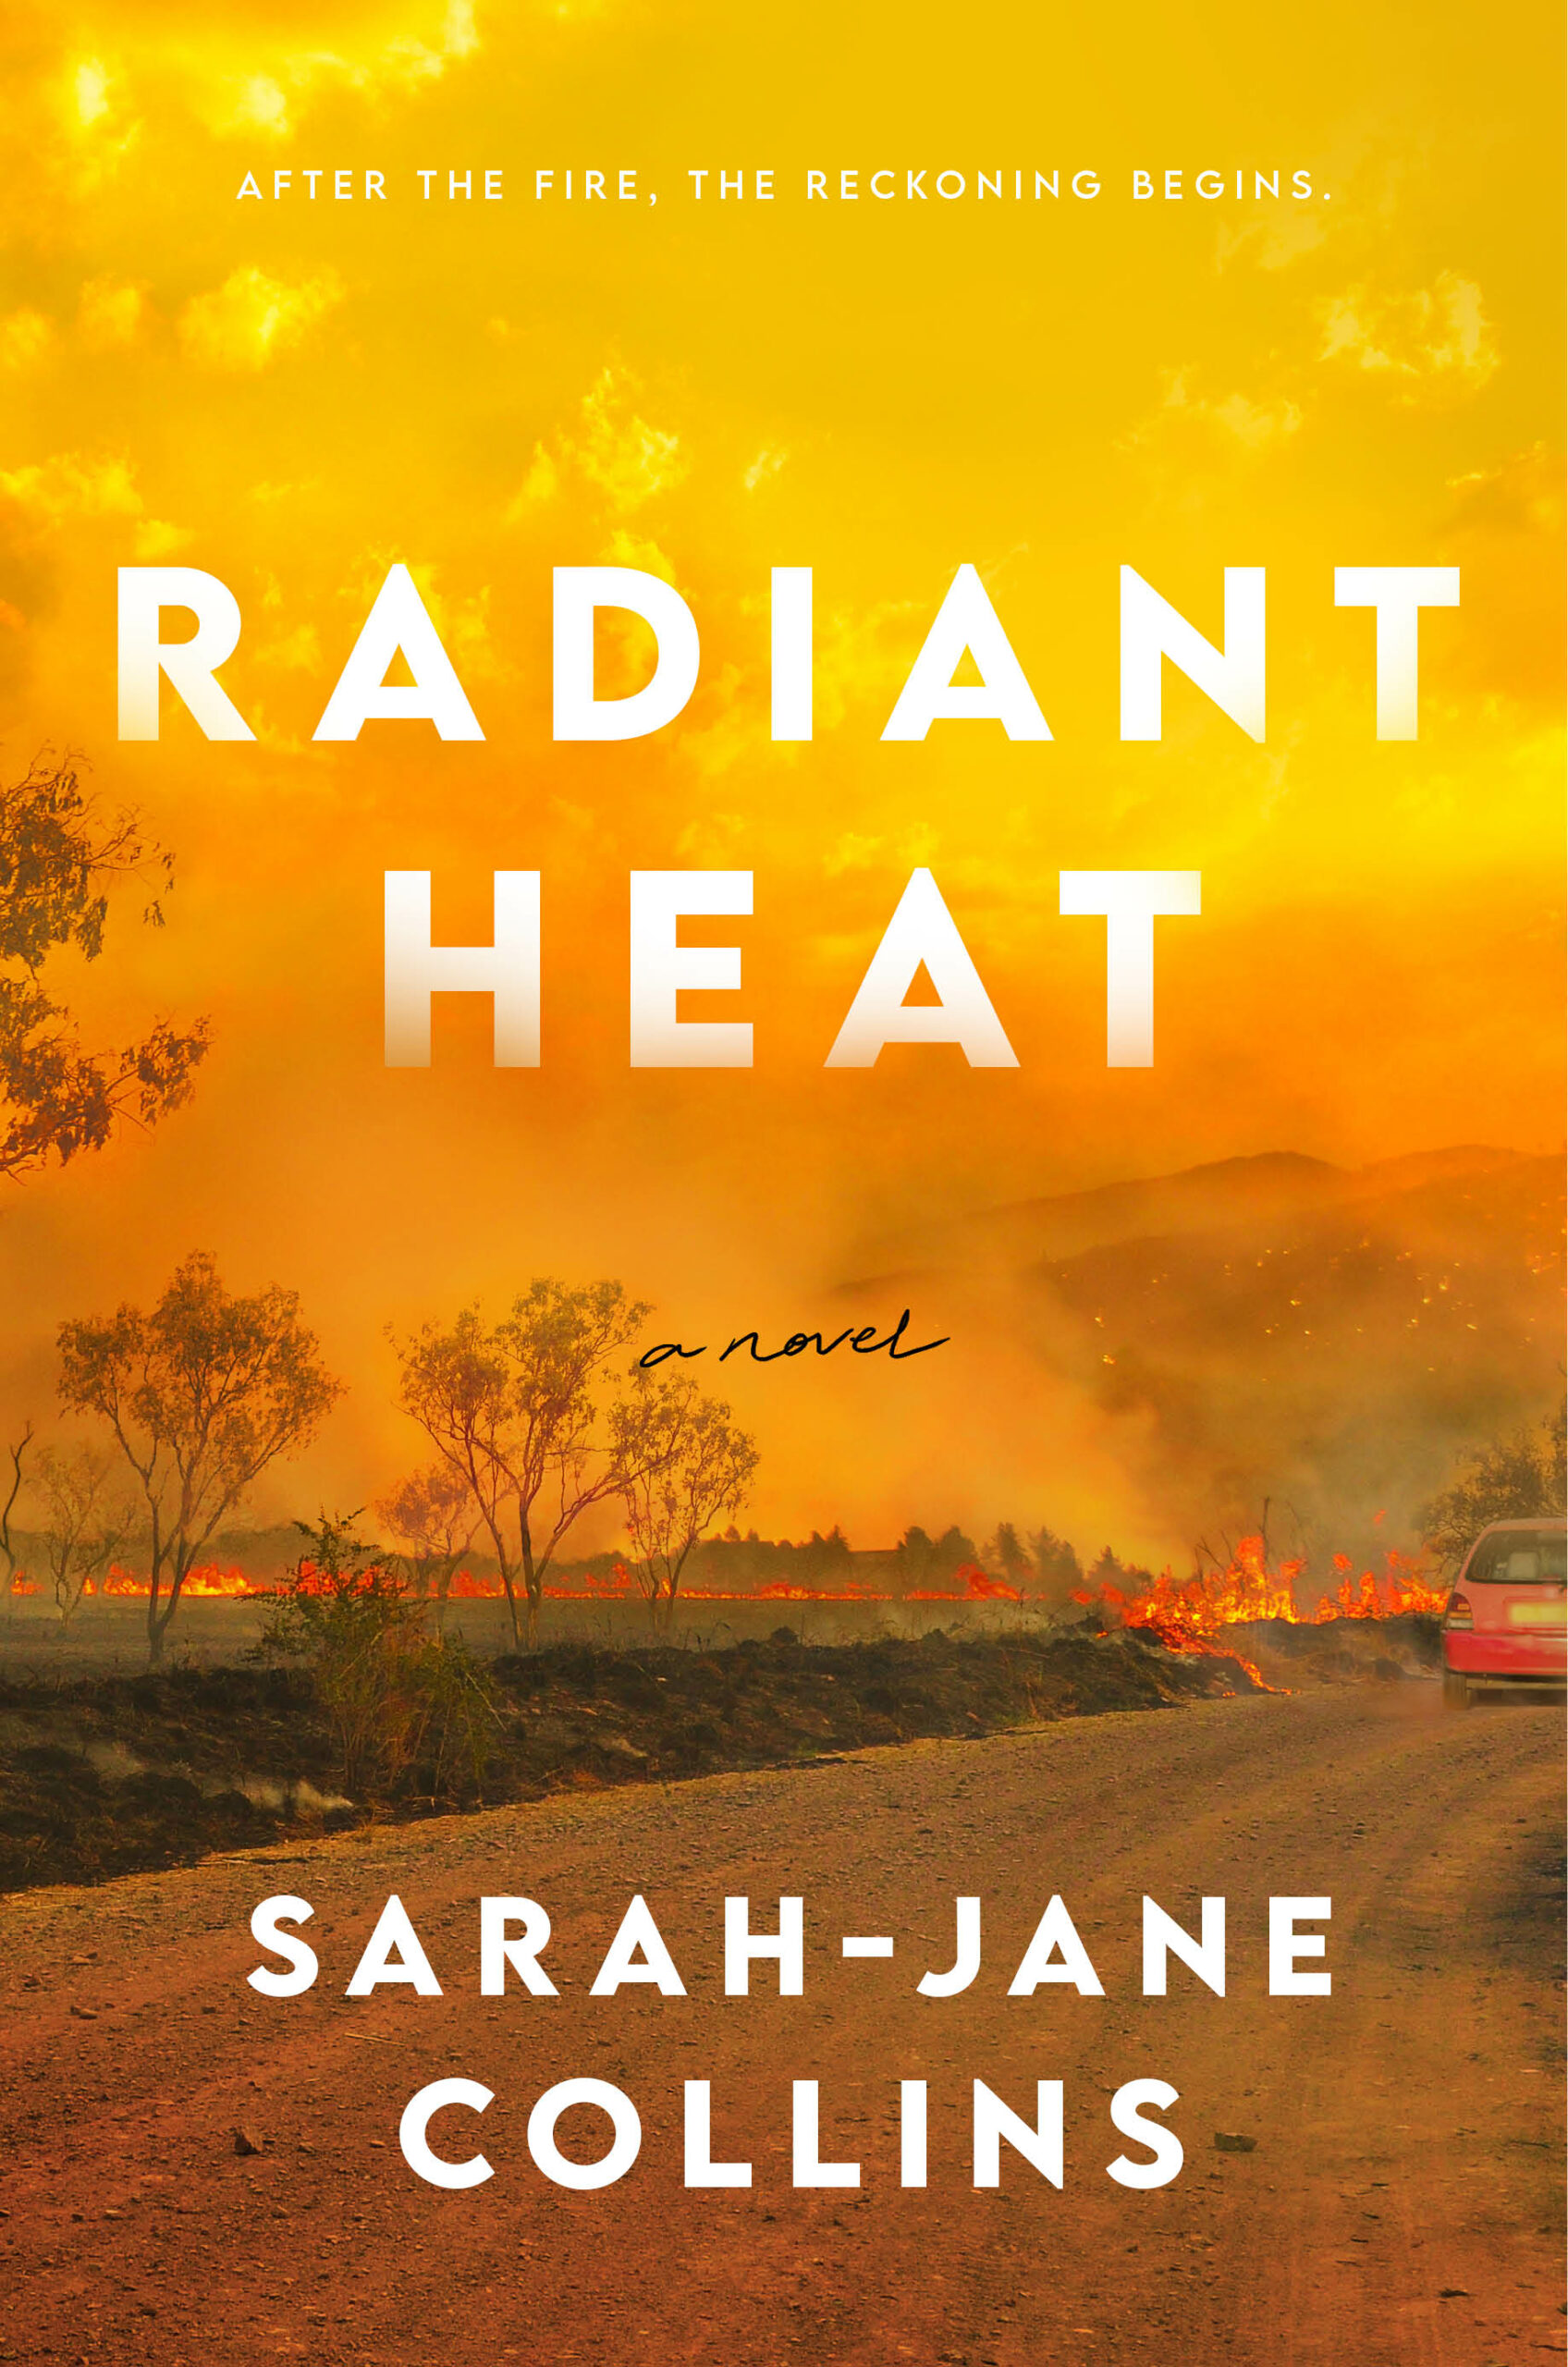 Book Launch: Radiant Heat by Sarah-Jane Collins in conversation with Mina Seçkin